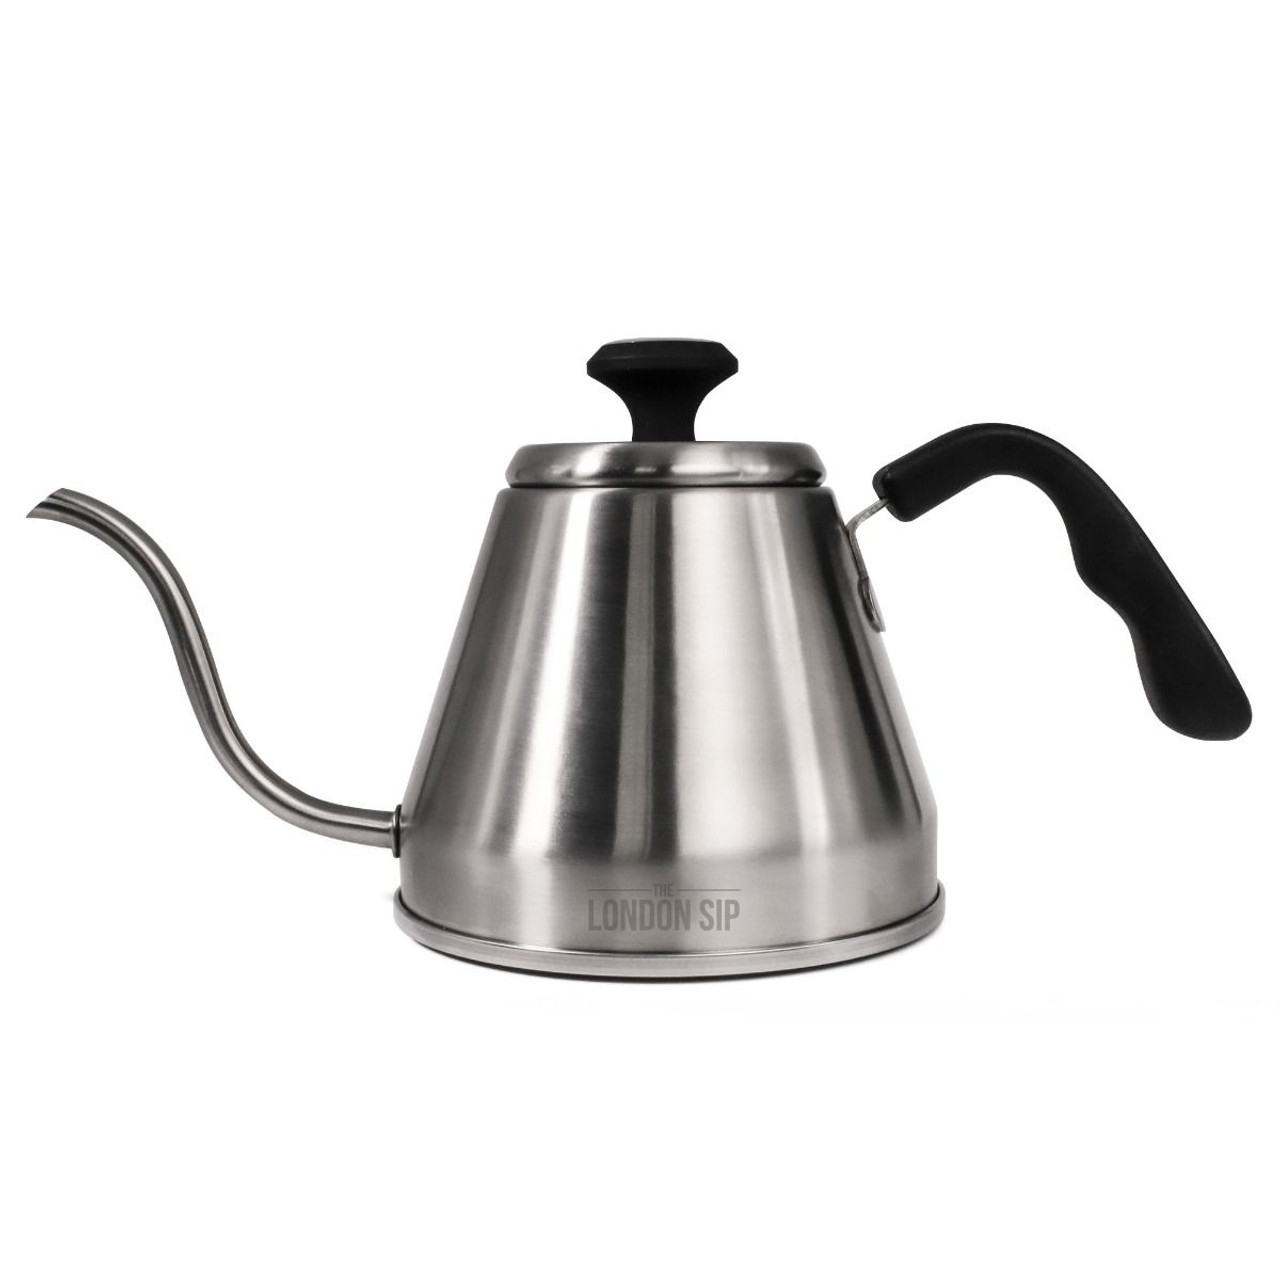 Hario V60 Buono Drip Kettle Stovetop Gooseneck Coffee Kettle 1.2L,  Stainless Steel, Silver